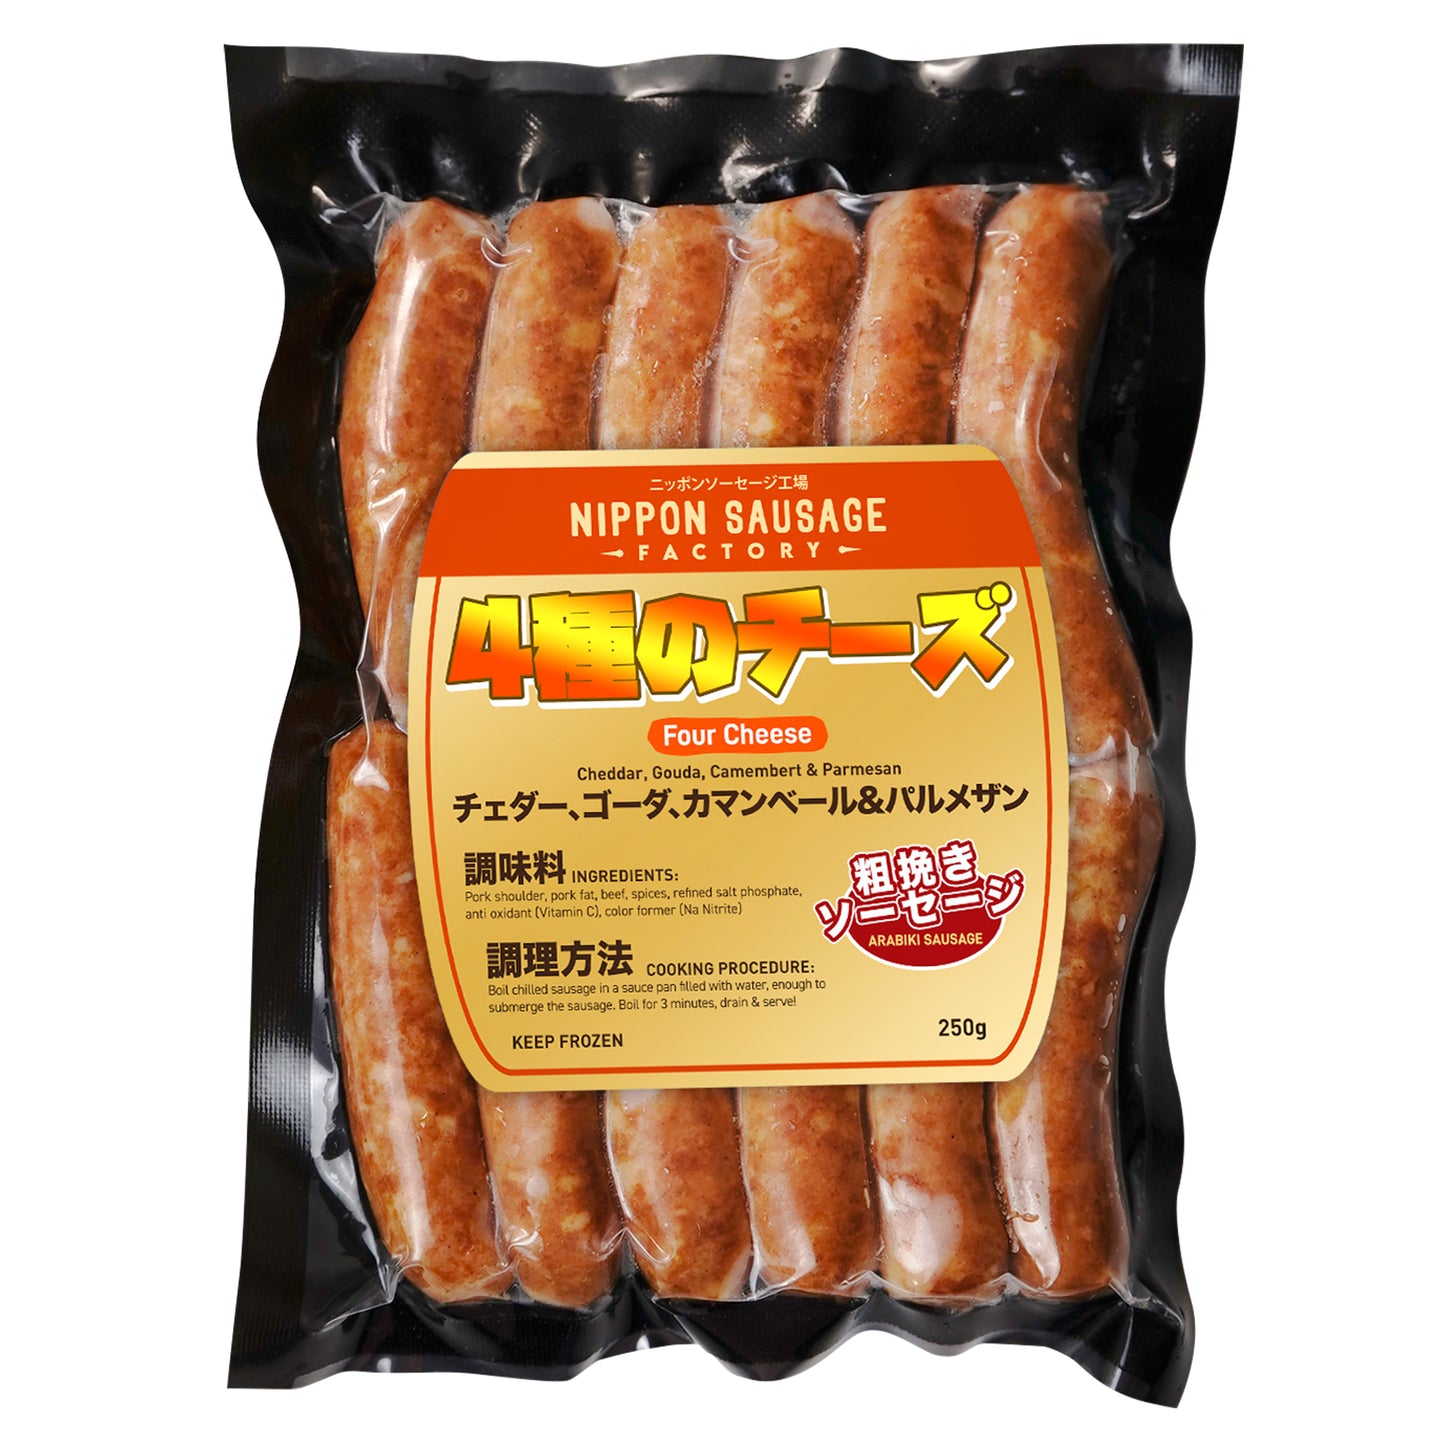 Four Cheese Sausage